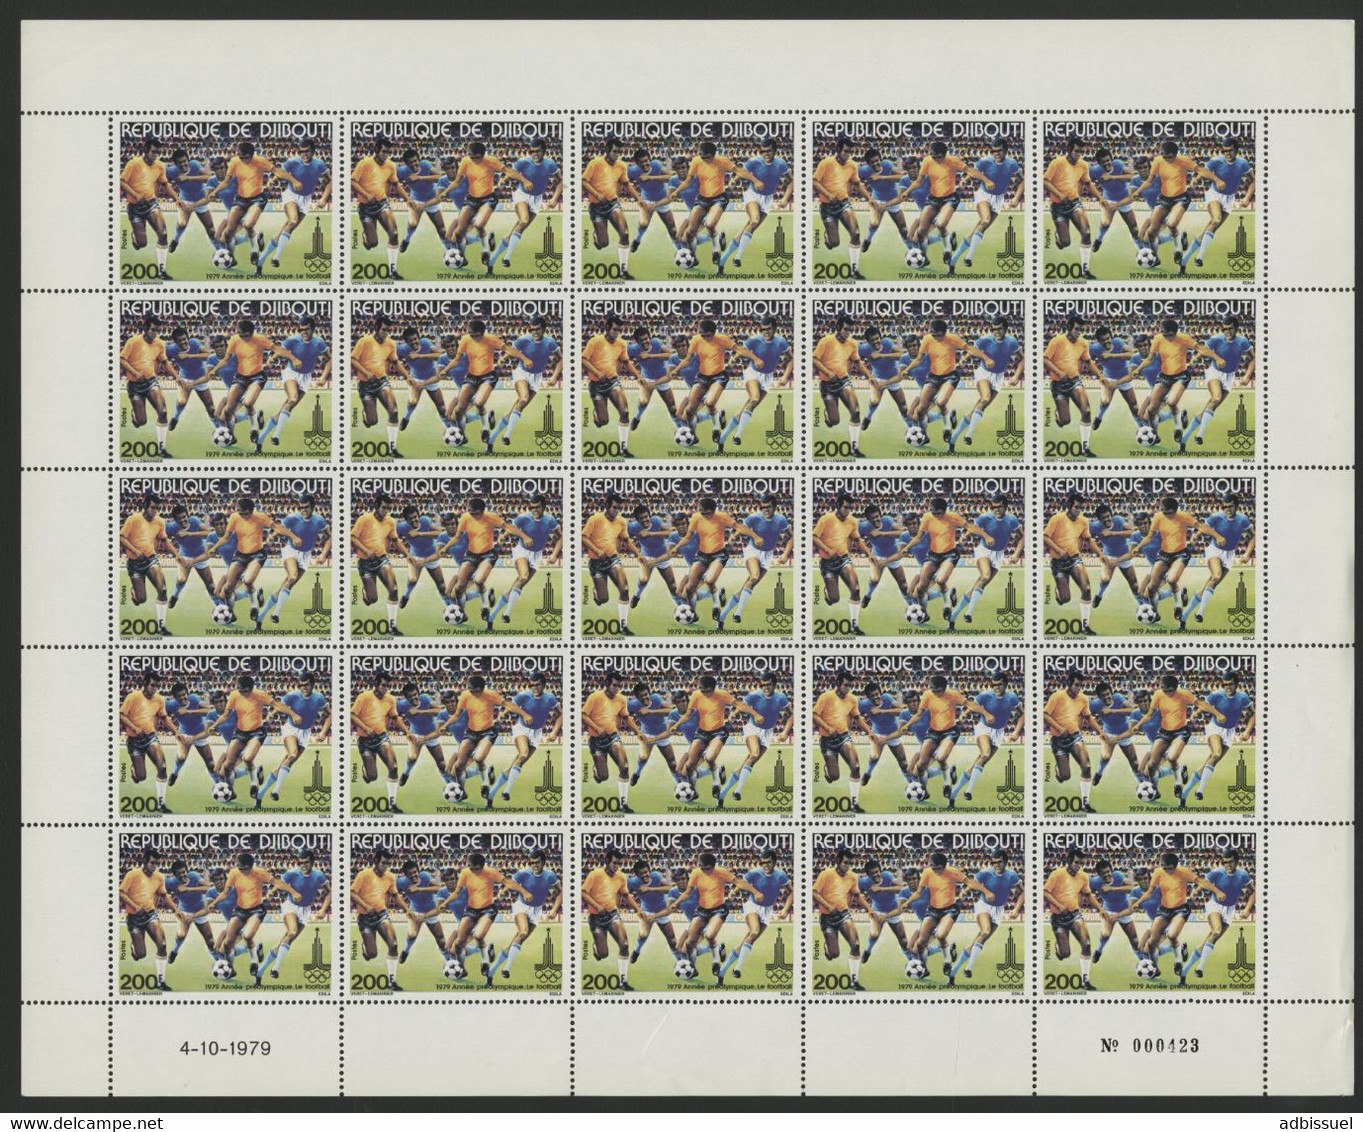 DJIBOUTI N° 511 COTE 106,25 € FEUILLE De 25 Ex. MNH ** ANNEE PREOLYMPIQUE OLYMPIC FOOTBALL SOCCER - Estate 1980: Mosca